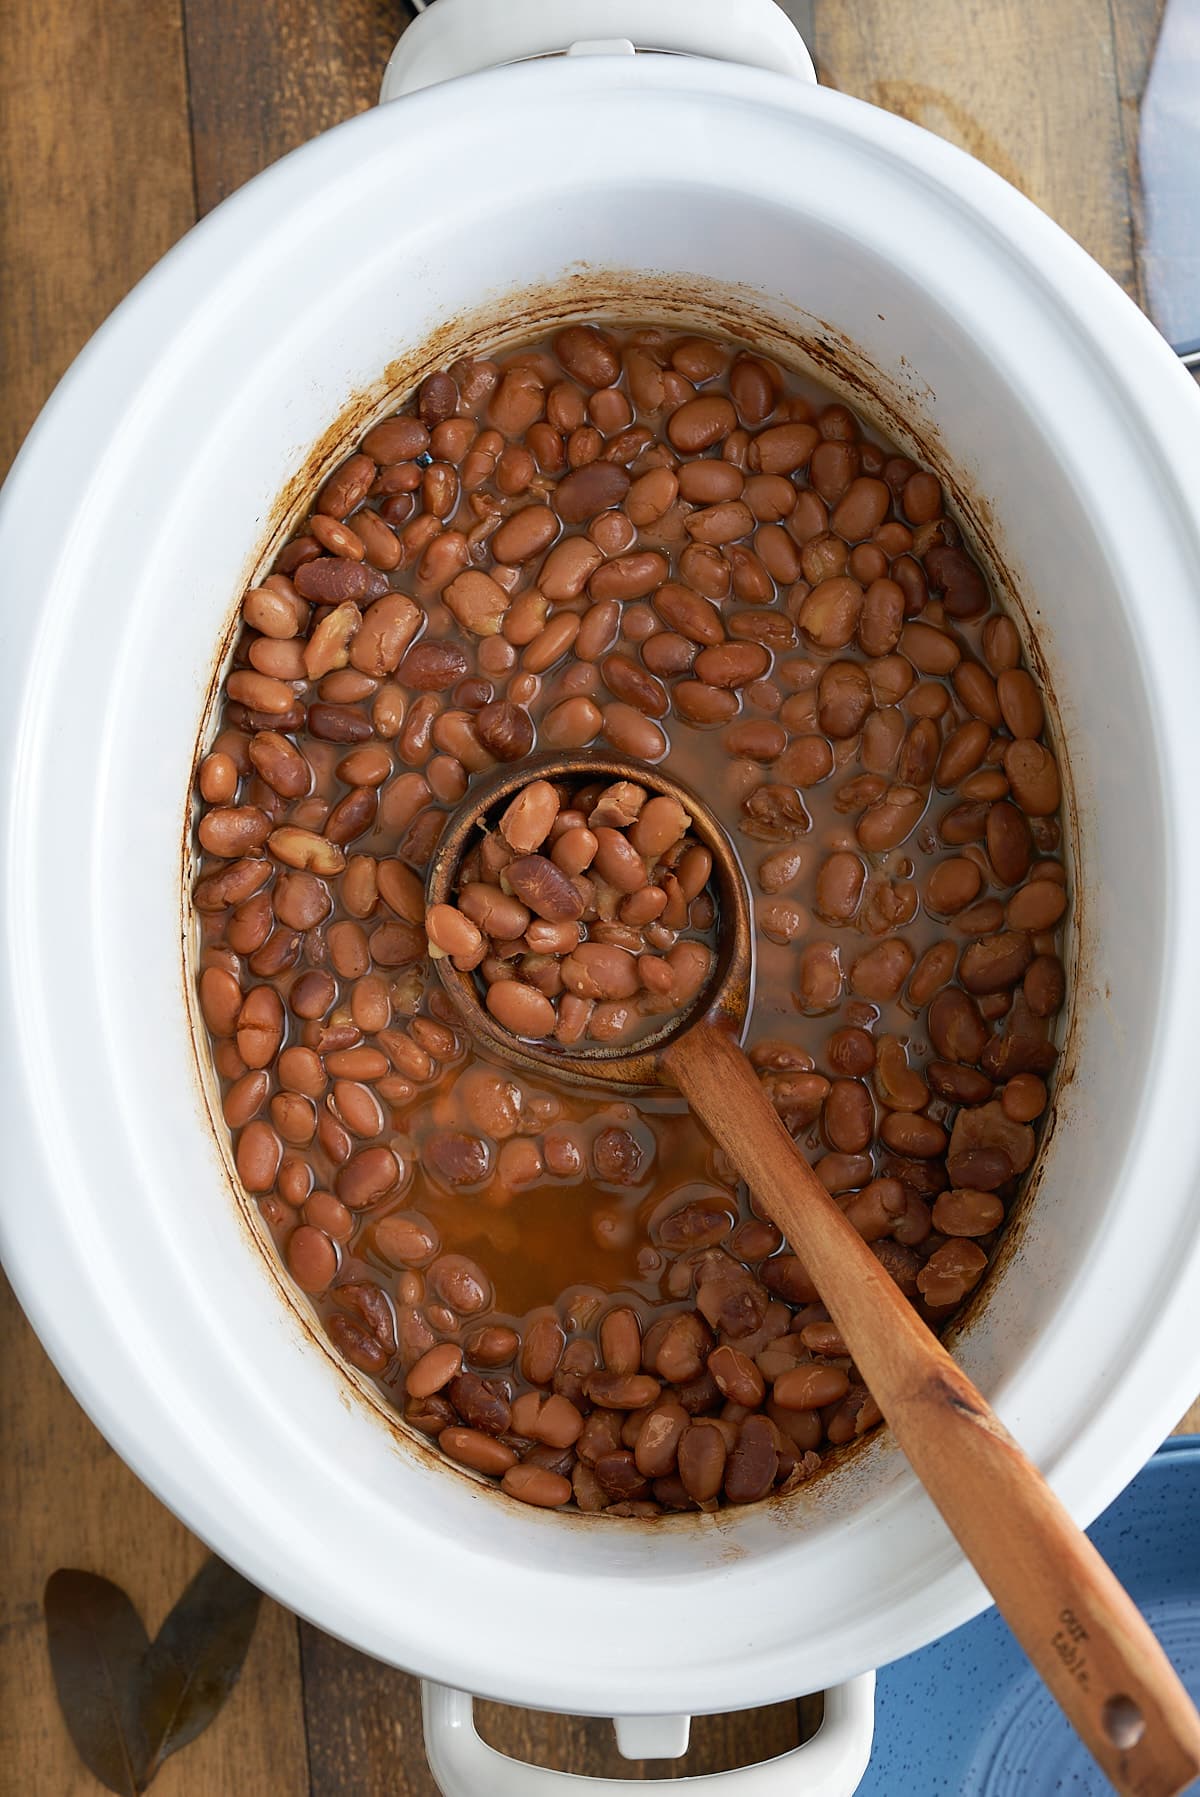 Slow cooker pinto beans cooked in the crock pot.